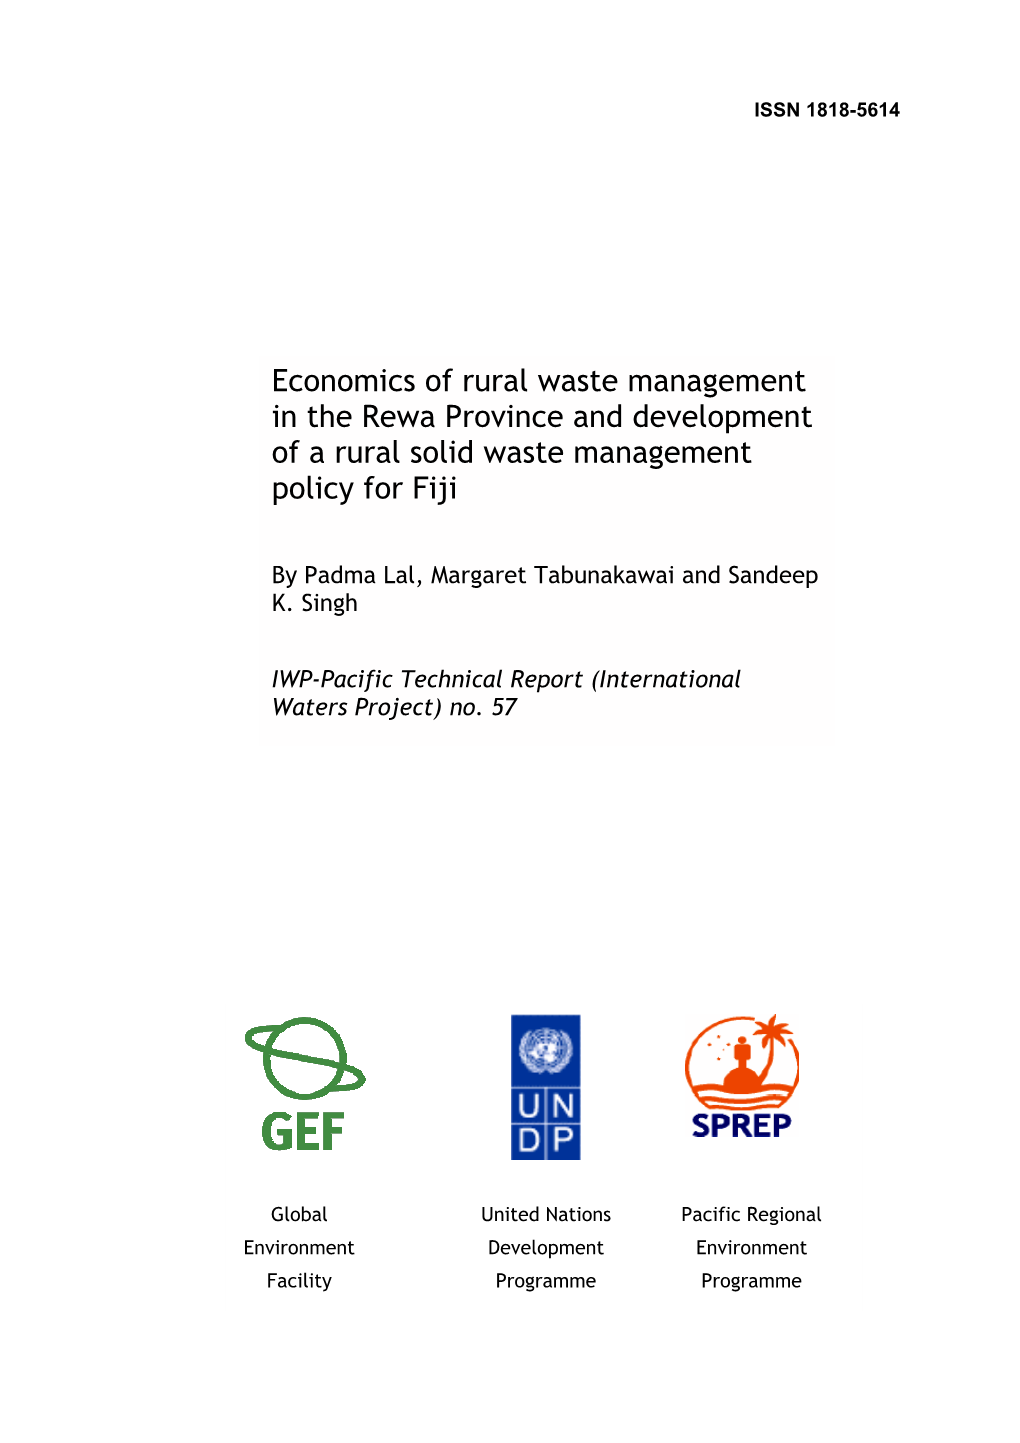 Economics of Rural Waste Management in the Rewa Province and Development of a Rural Solid Waste Management Policy for Fiji